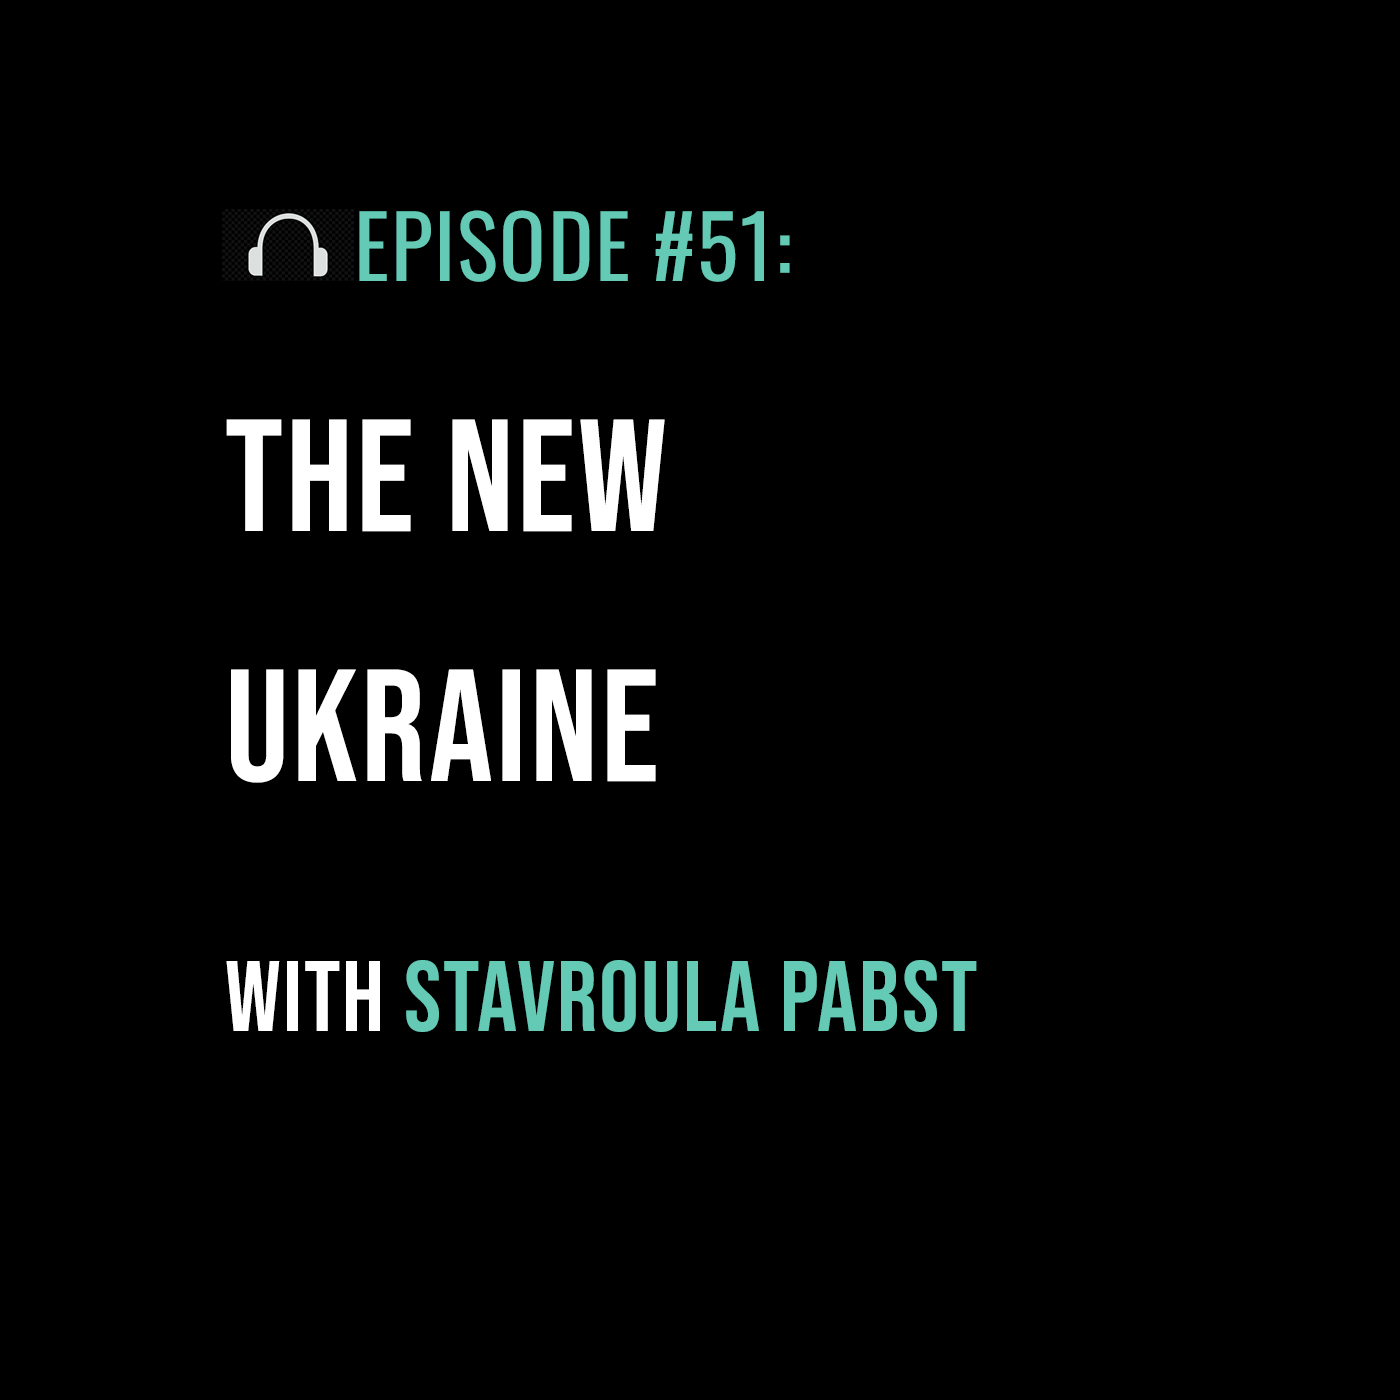 The New Ukraine with Stavroula Pabst